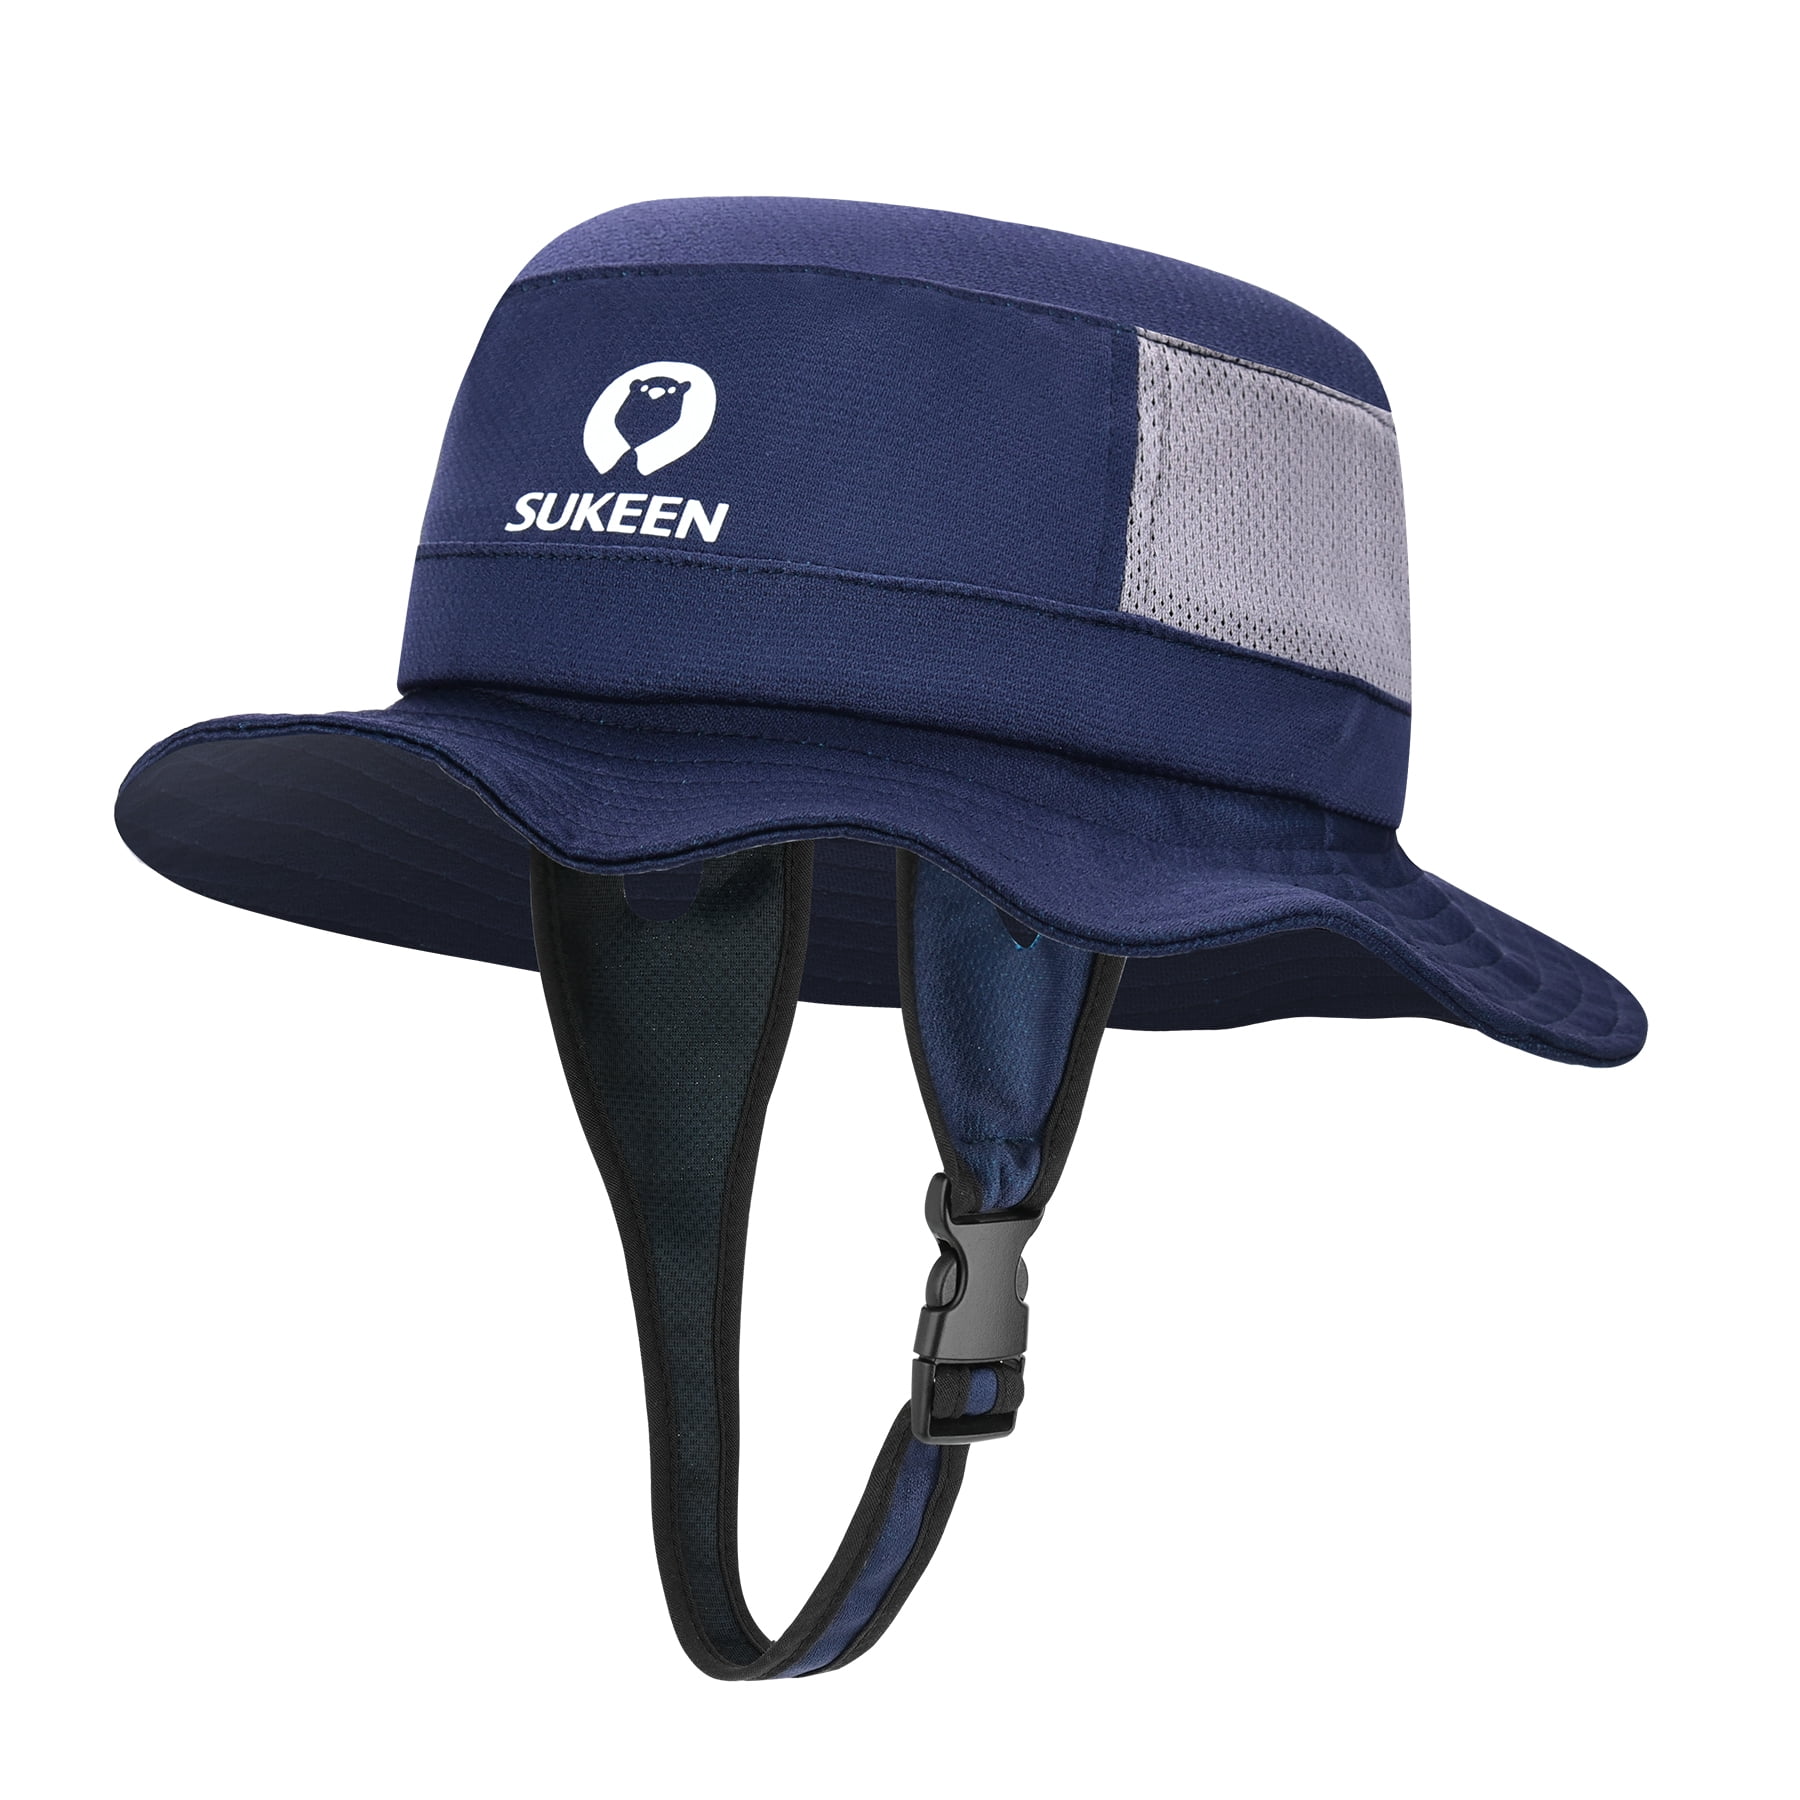 Sukeen Cooling Hats for Men Women, Lightweight Quick Dry Cooling Cap Keep  Head Cool, Cooling Baseball Cap with Adjust Strap